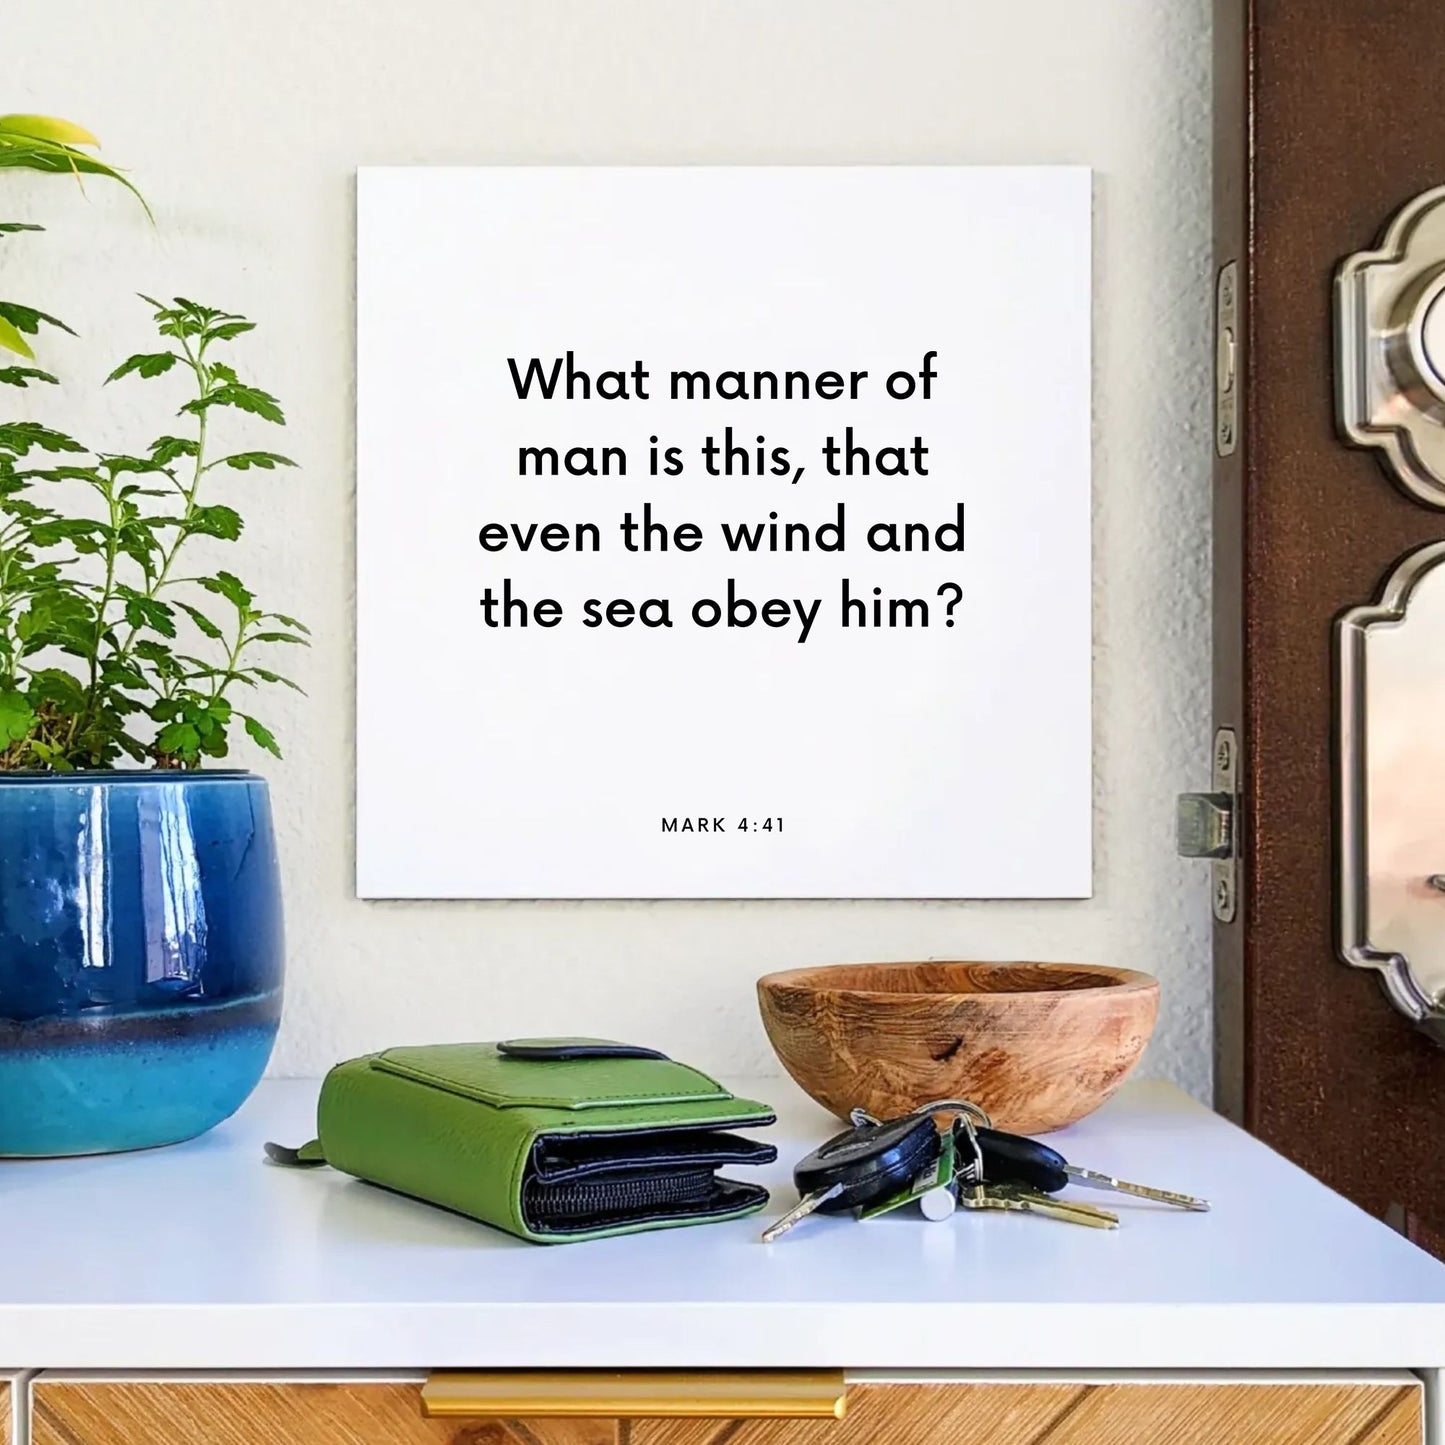 Entryway mouting of the scripture tile for Mark 4:41 - "What manner of man is this?"